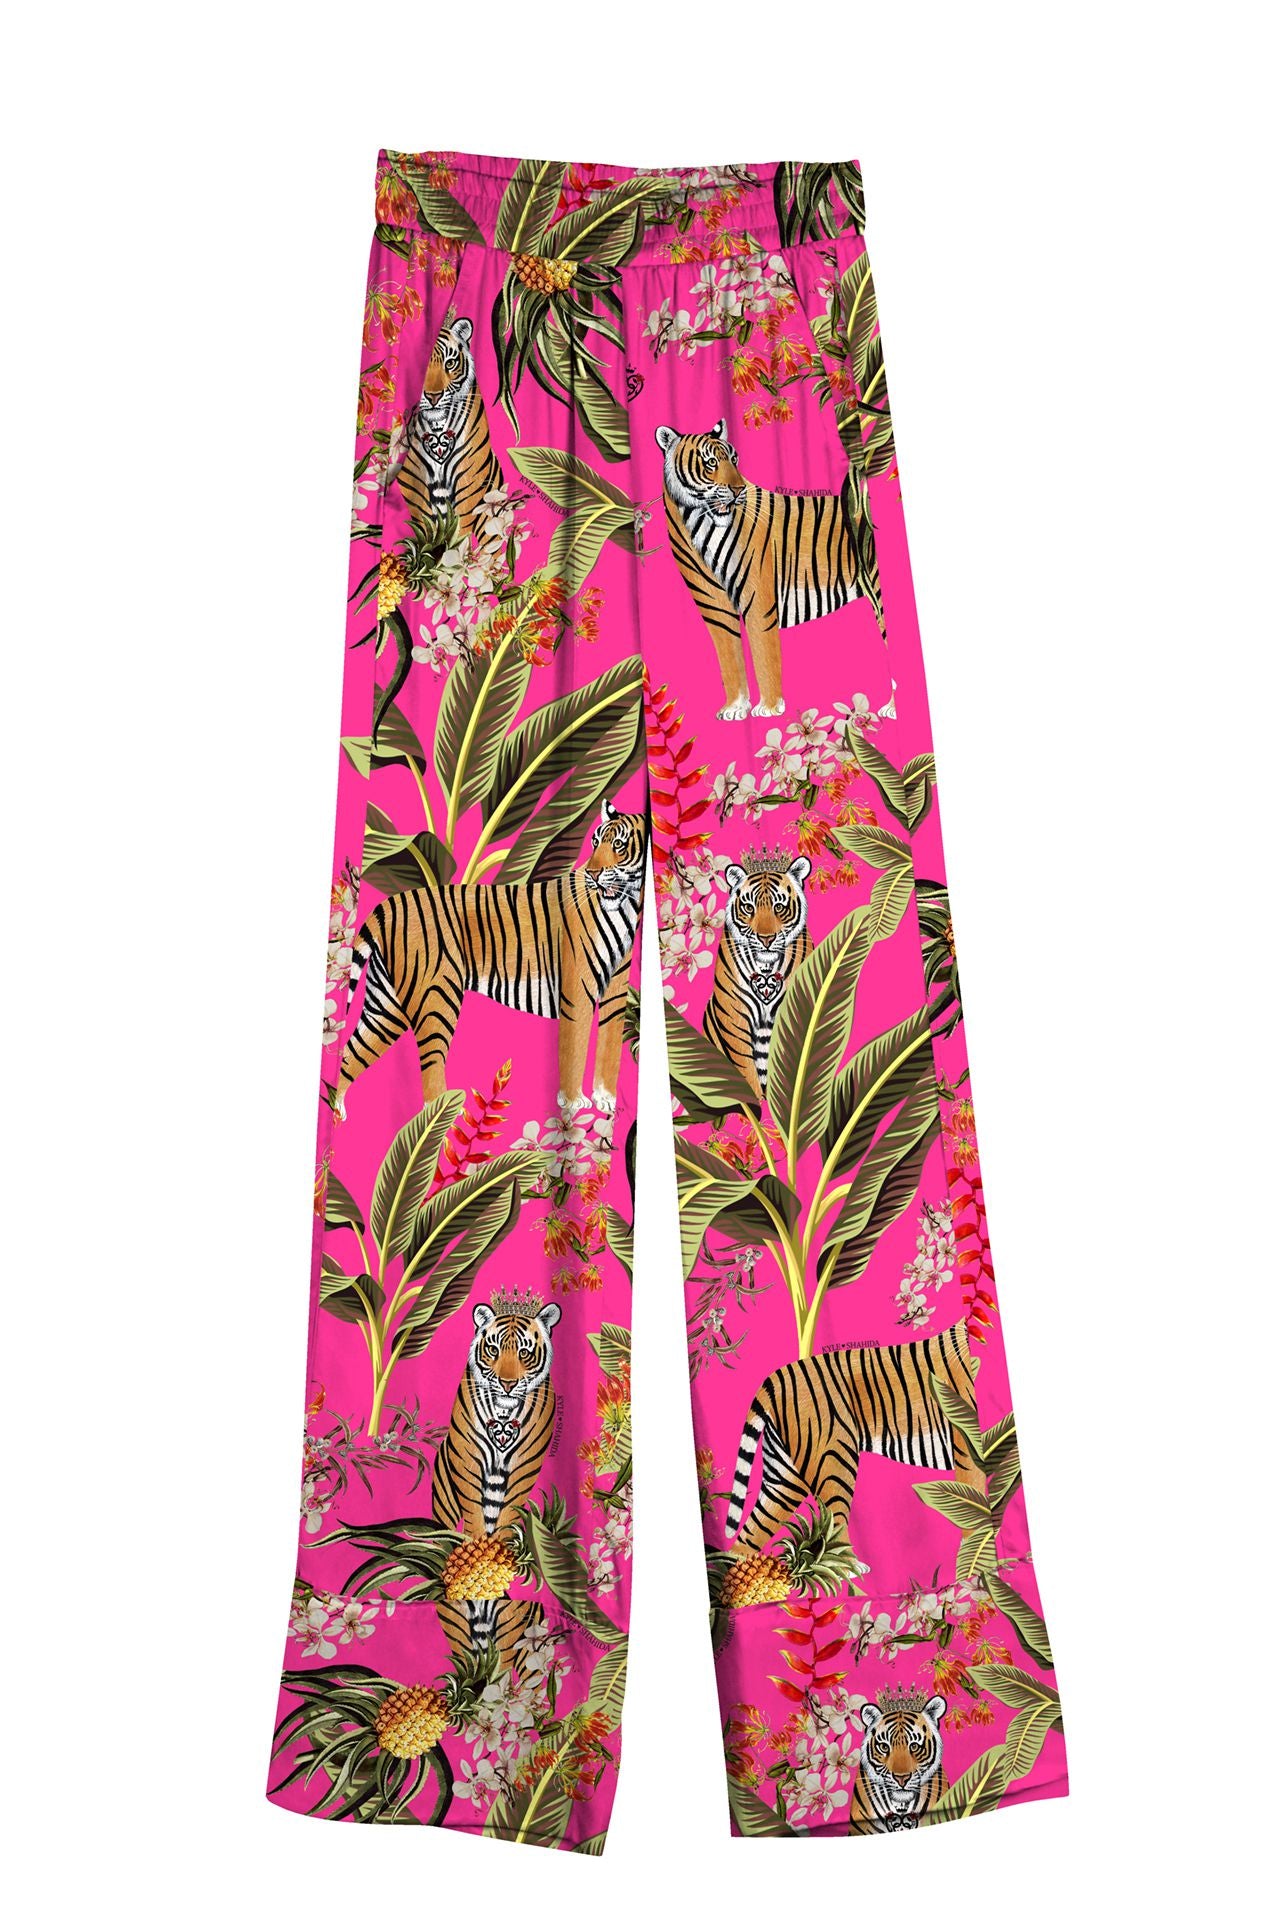 Printed-Silk-Straight-Fit-Pants-By-Kyle-Richard